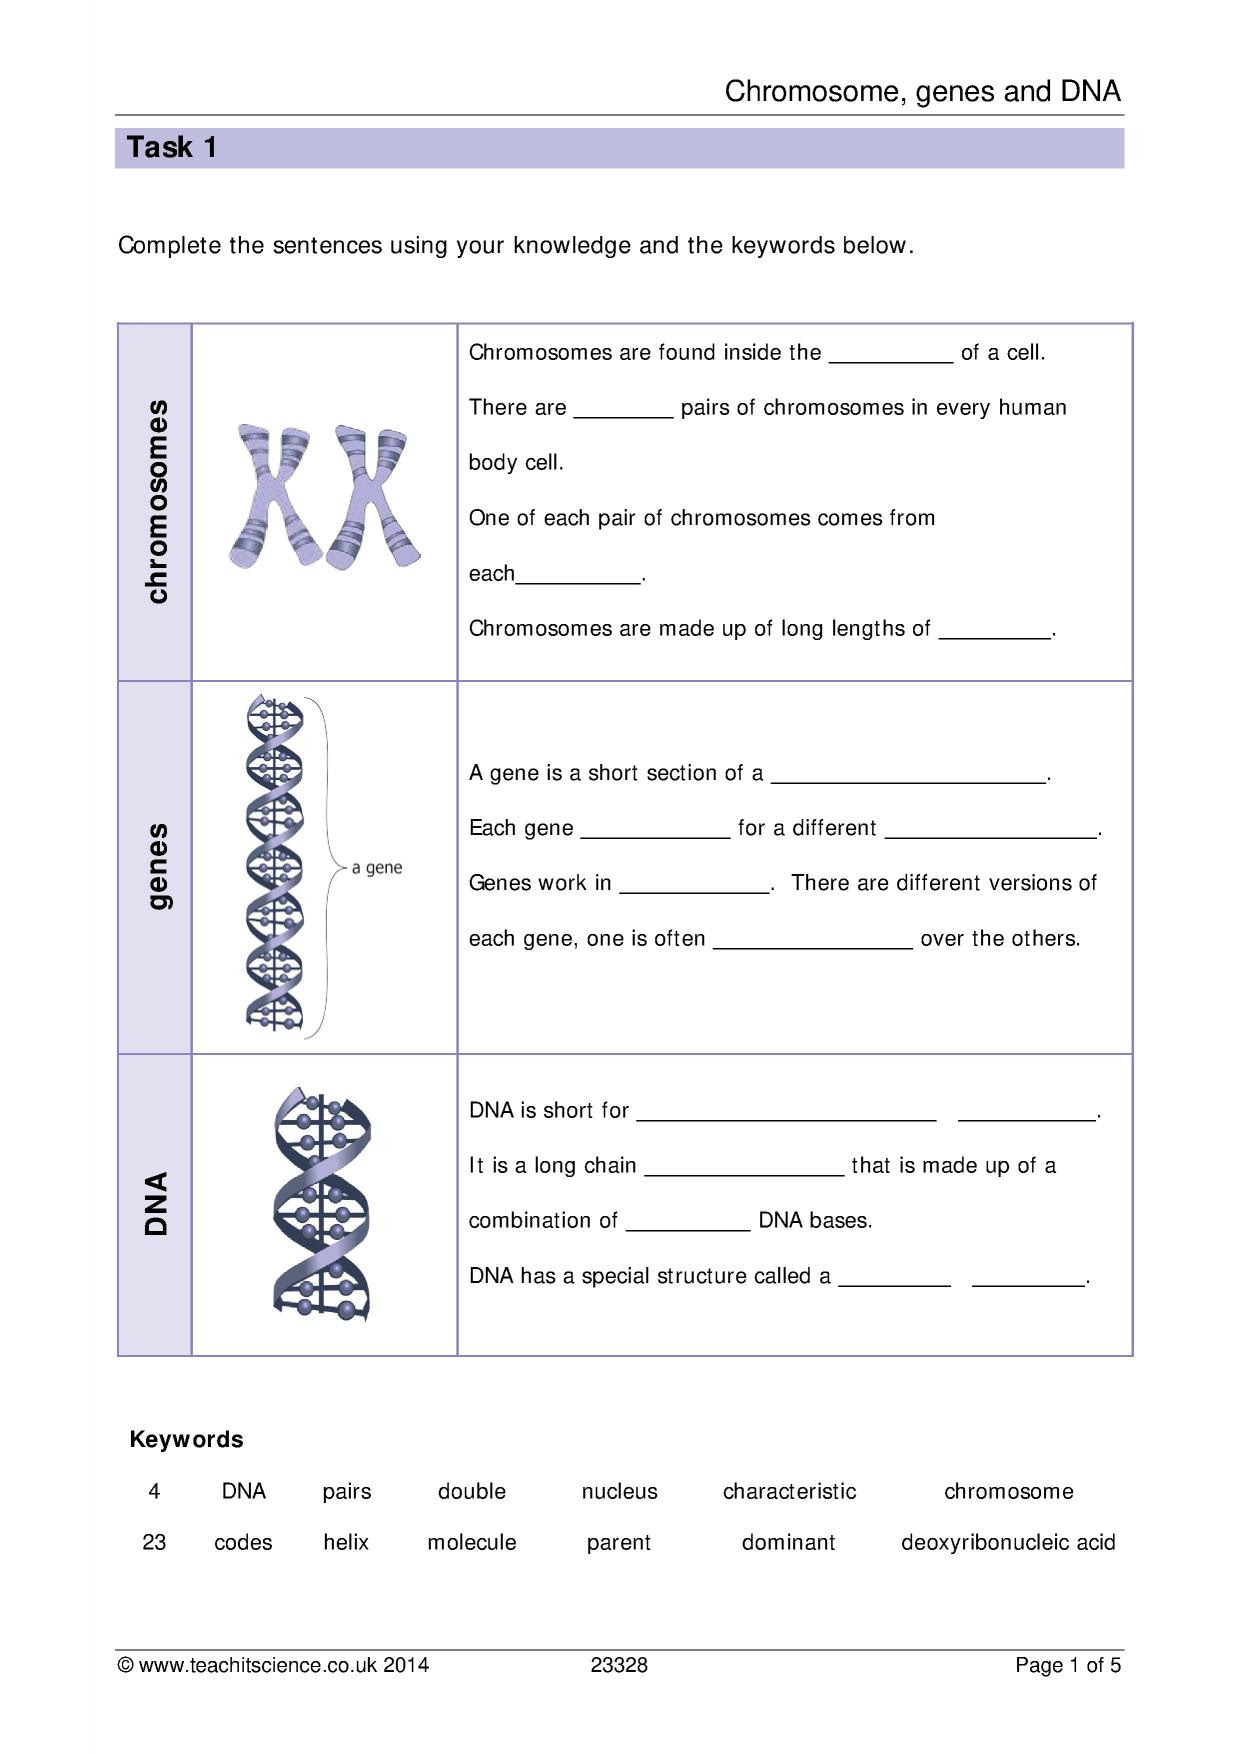 amoeba-sisters-alleles-and-genes-worksheet-dna-chromosomes-genes-and-traits-an-intro-to